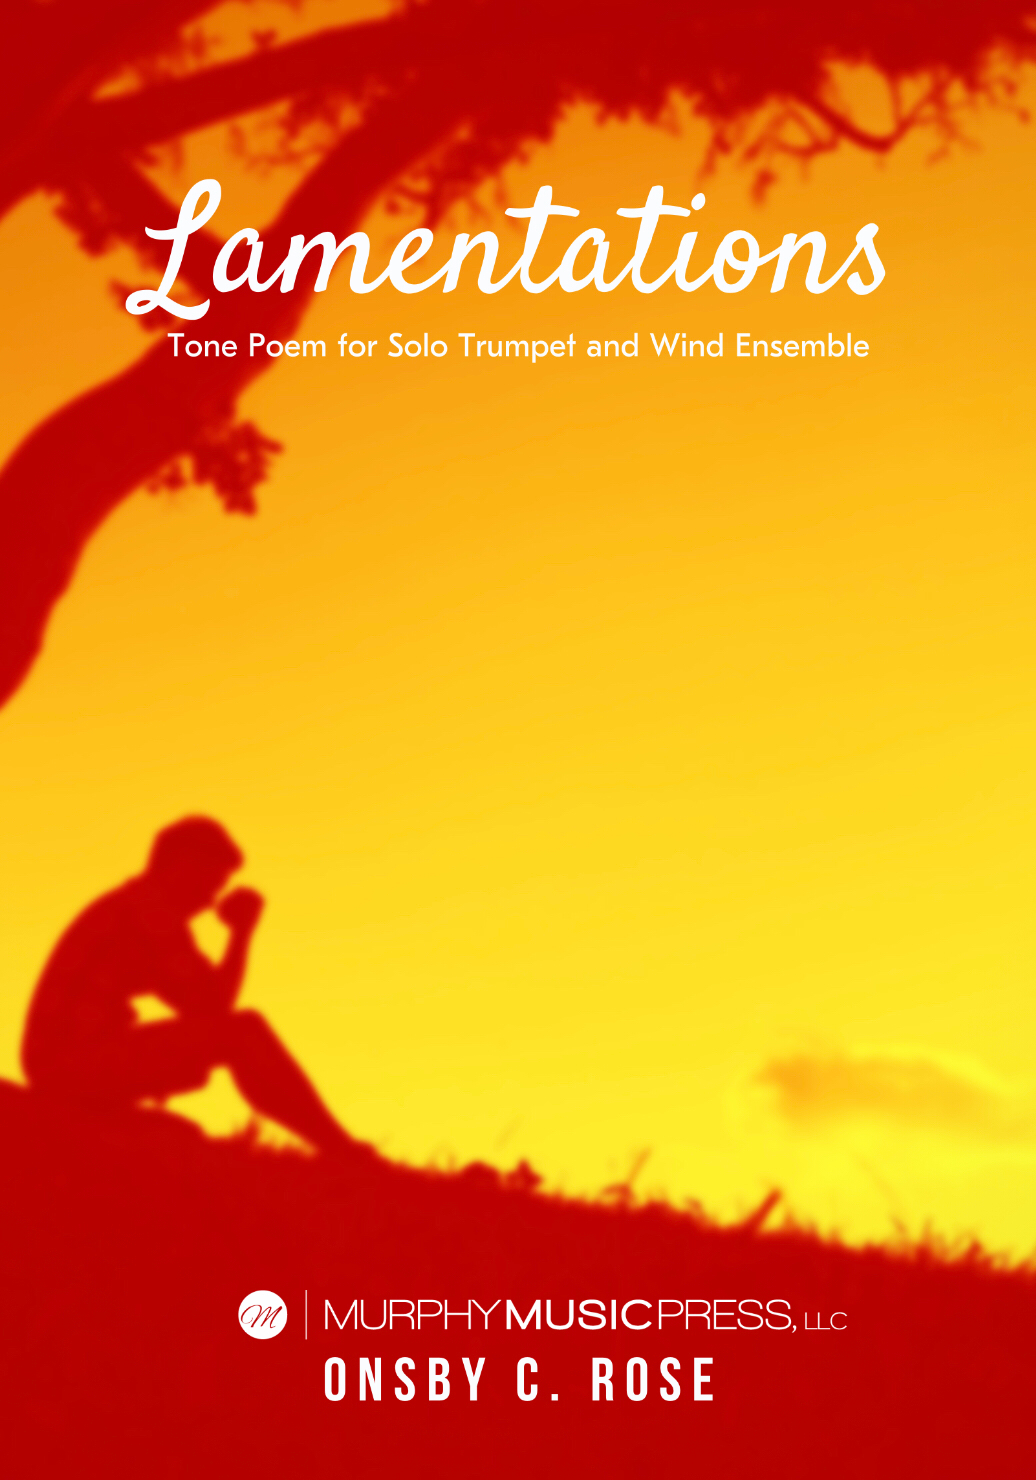 Lamentations For Trumpet And Wind Ensemble by Onsby C. Rose